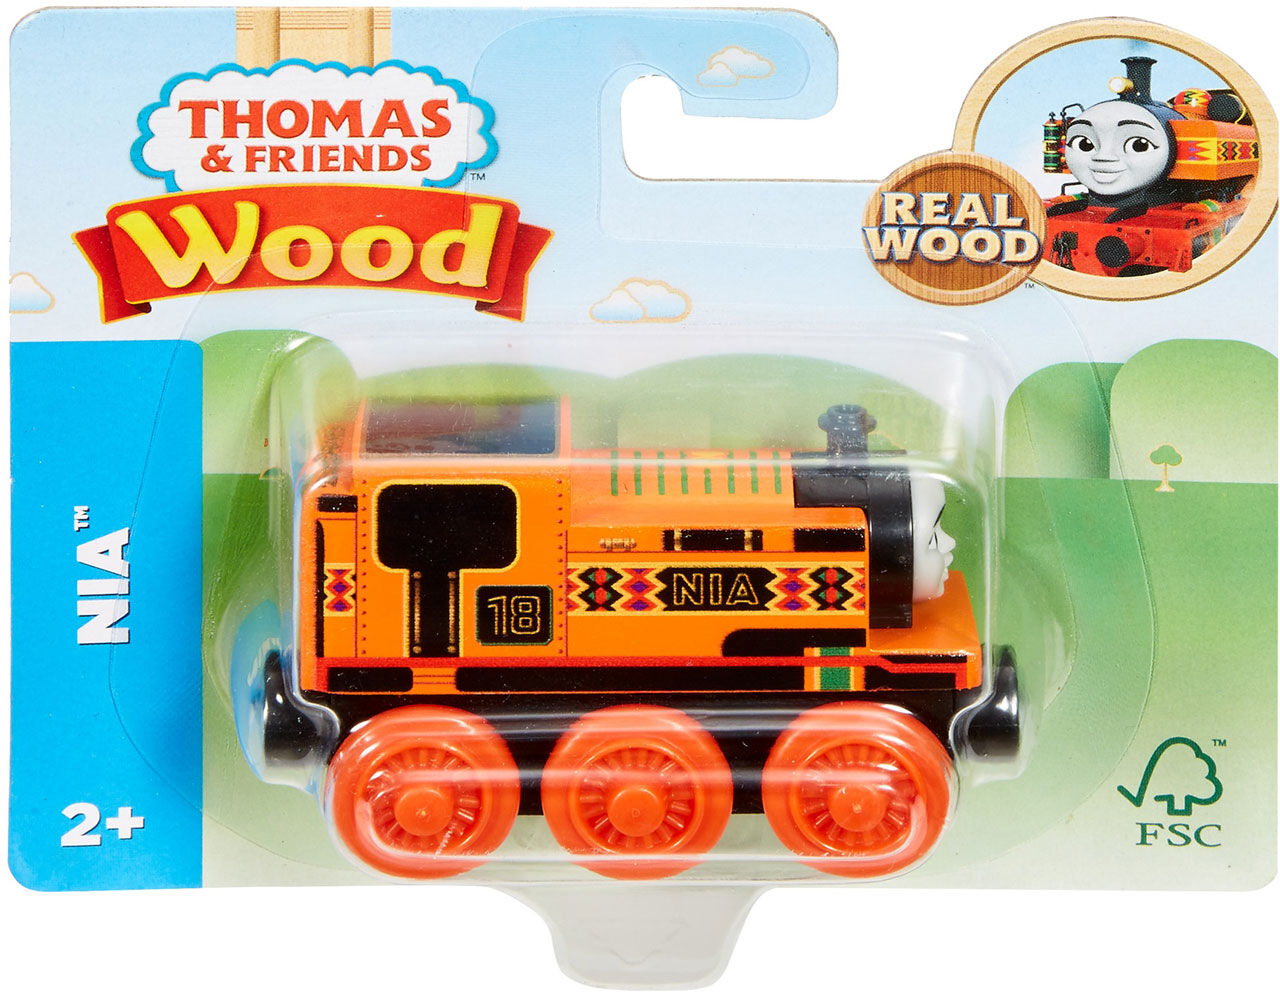 nia thomas and friends toy